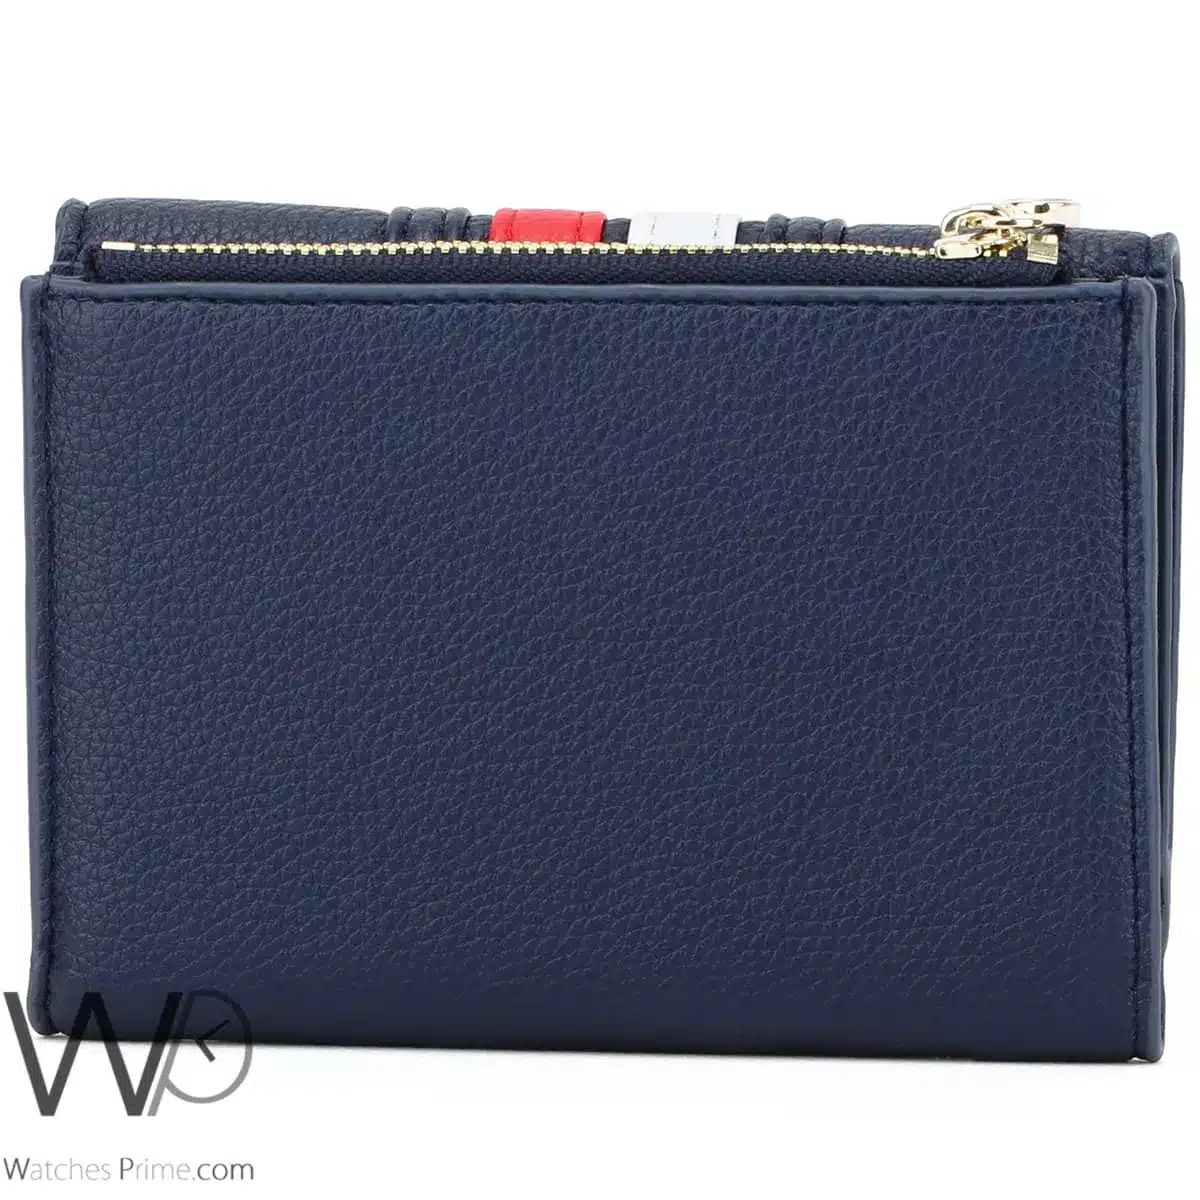 Tommy Hilfiger TH wallet Navy Blue For Women | Watches Prime